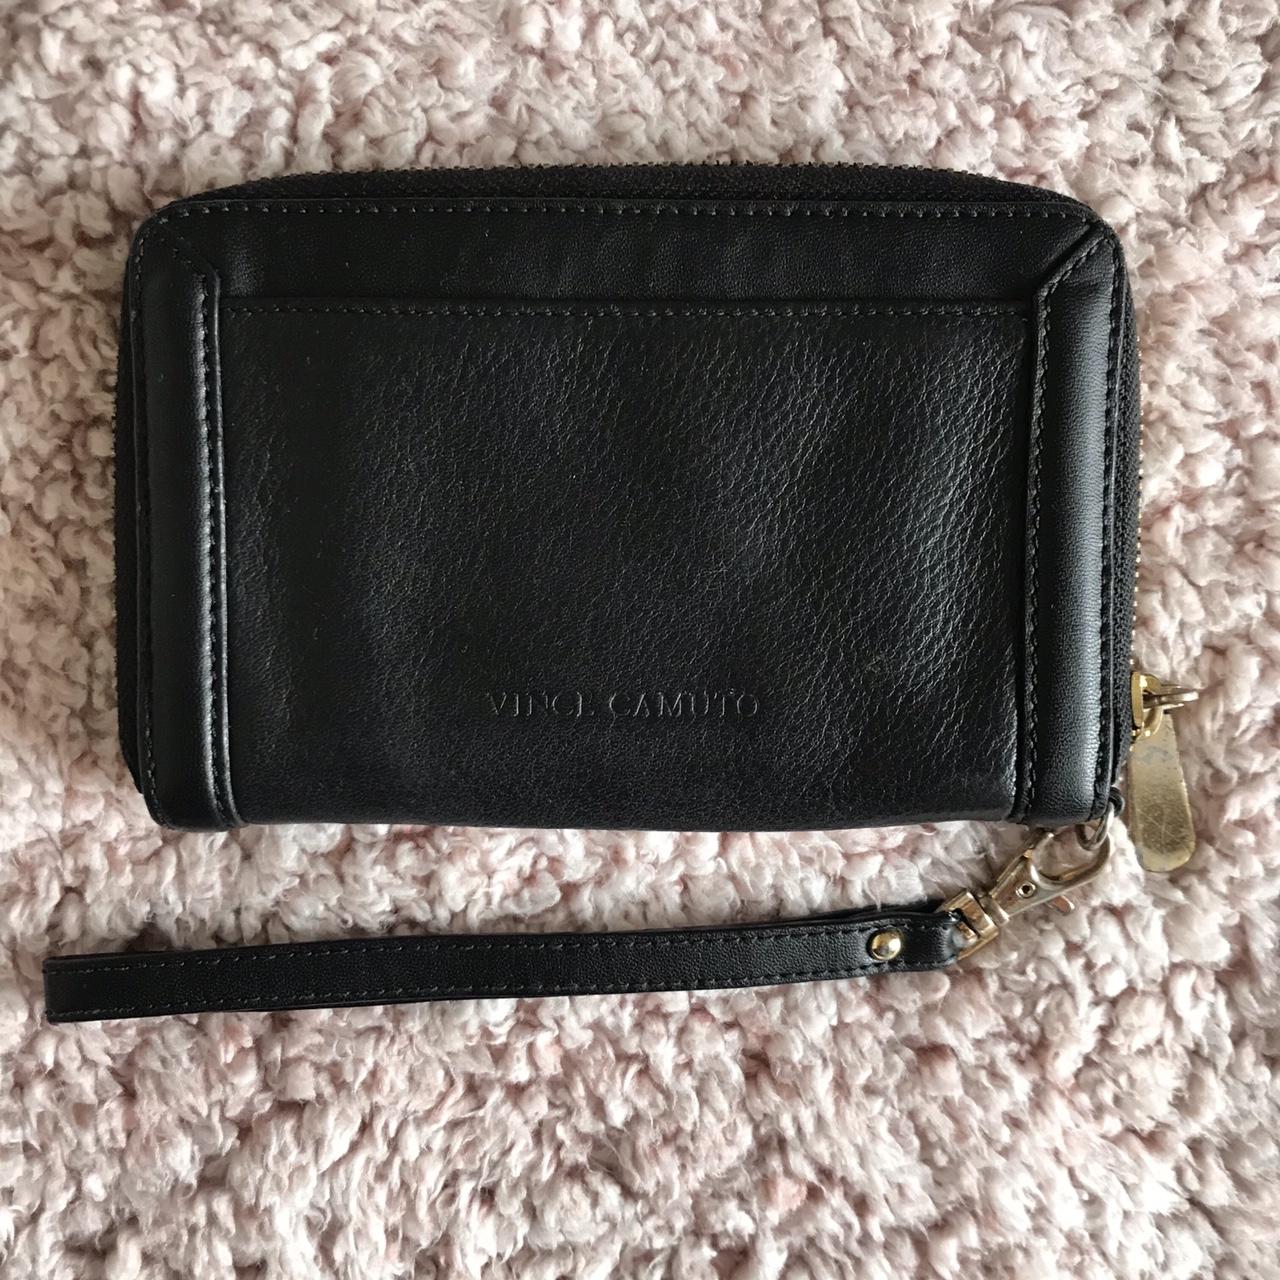 Good condition black Vince Camuto wallet with gold... - Depop